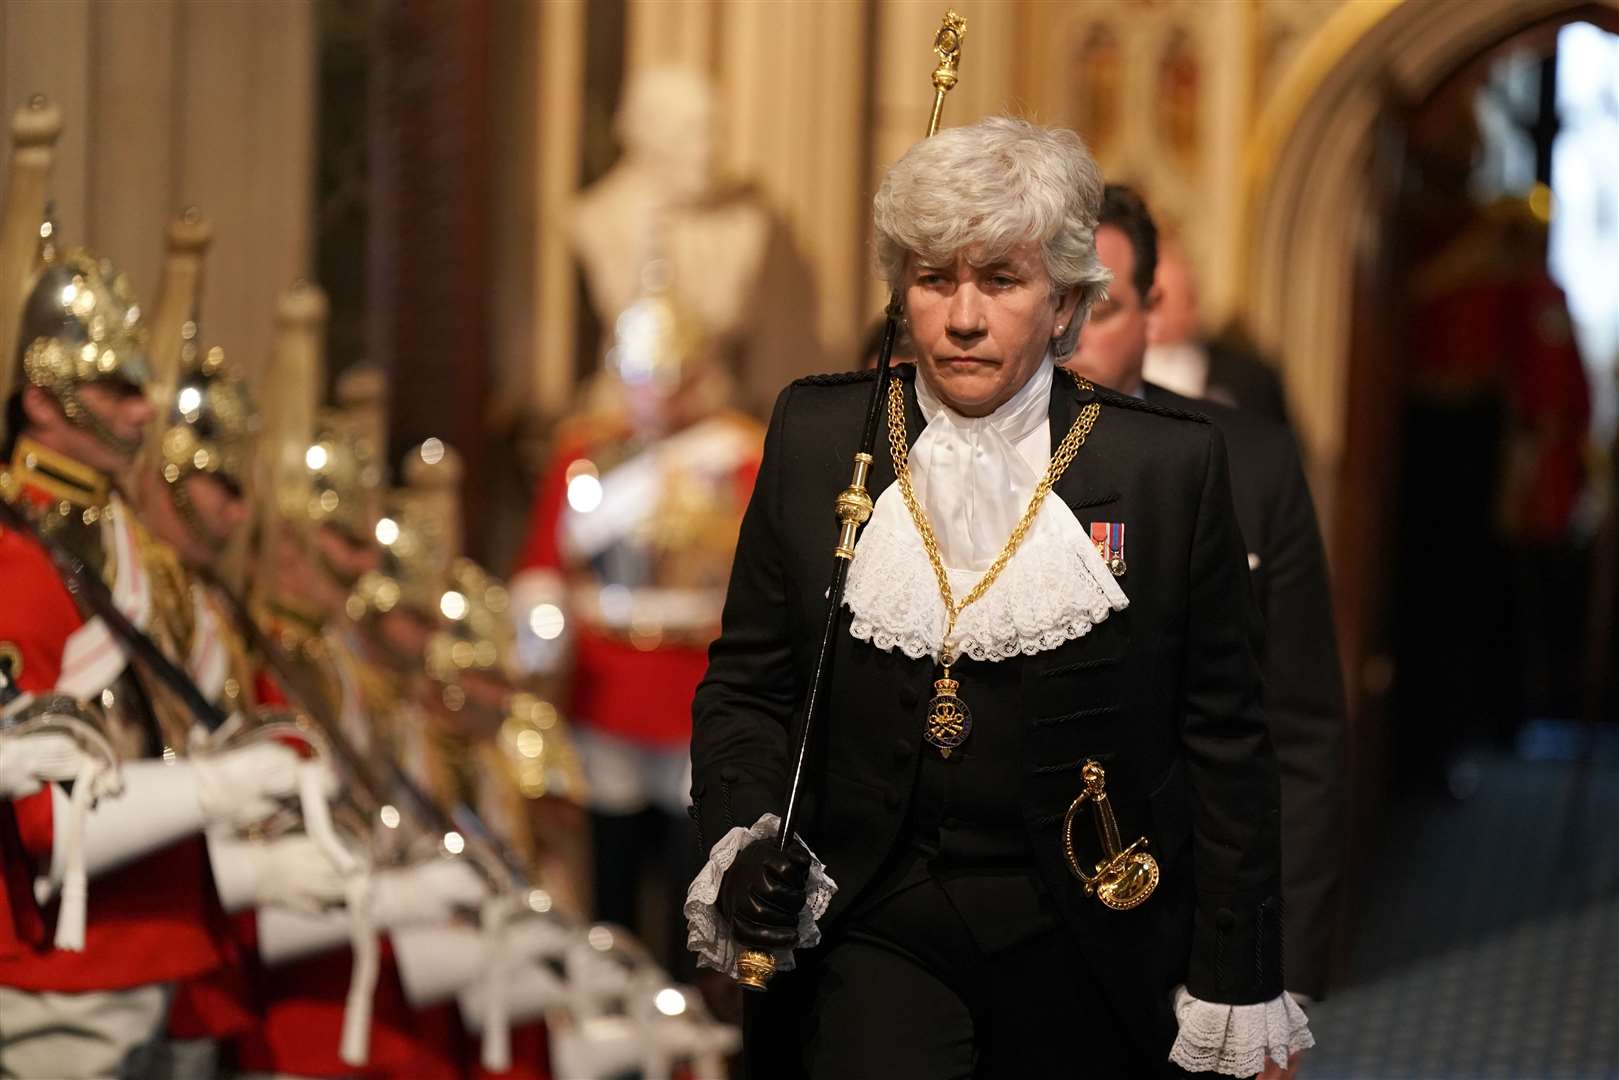 Lady Usher of the Black Rod walks through the Norman Porch for the State Opening of Parliament (Aaron Chown/PA)